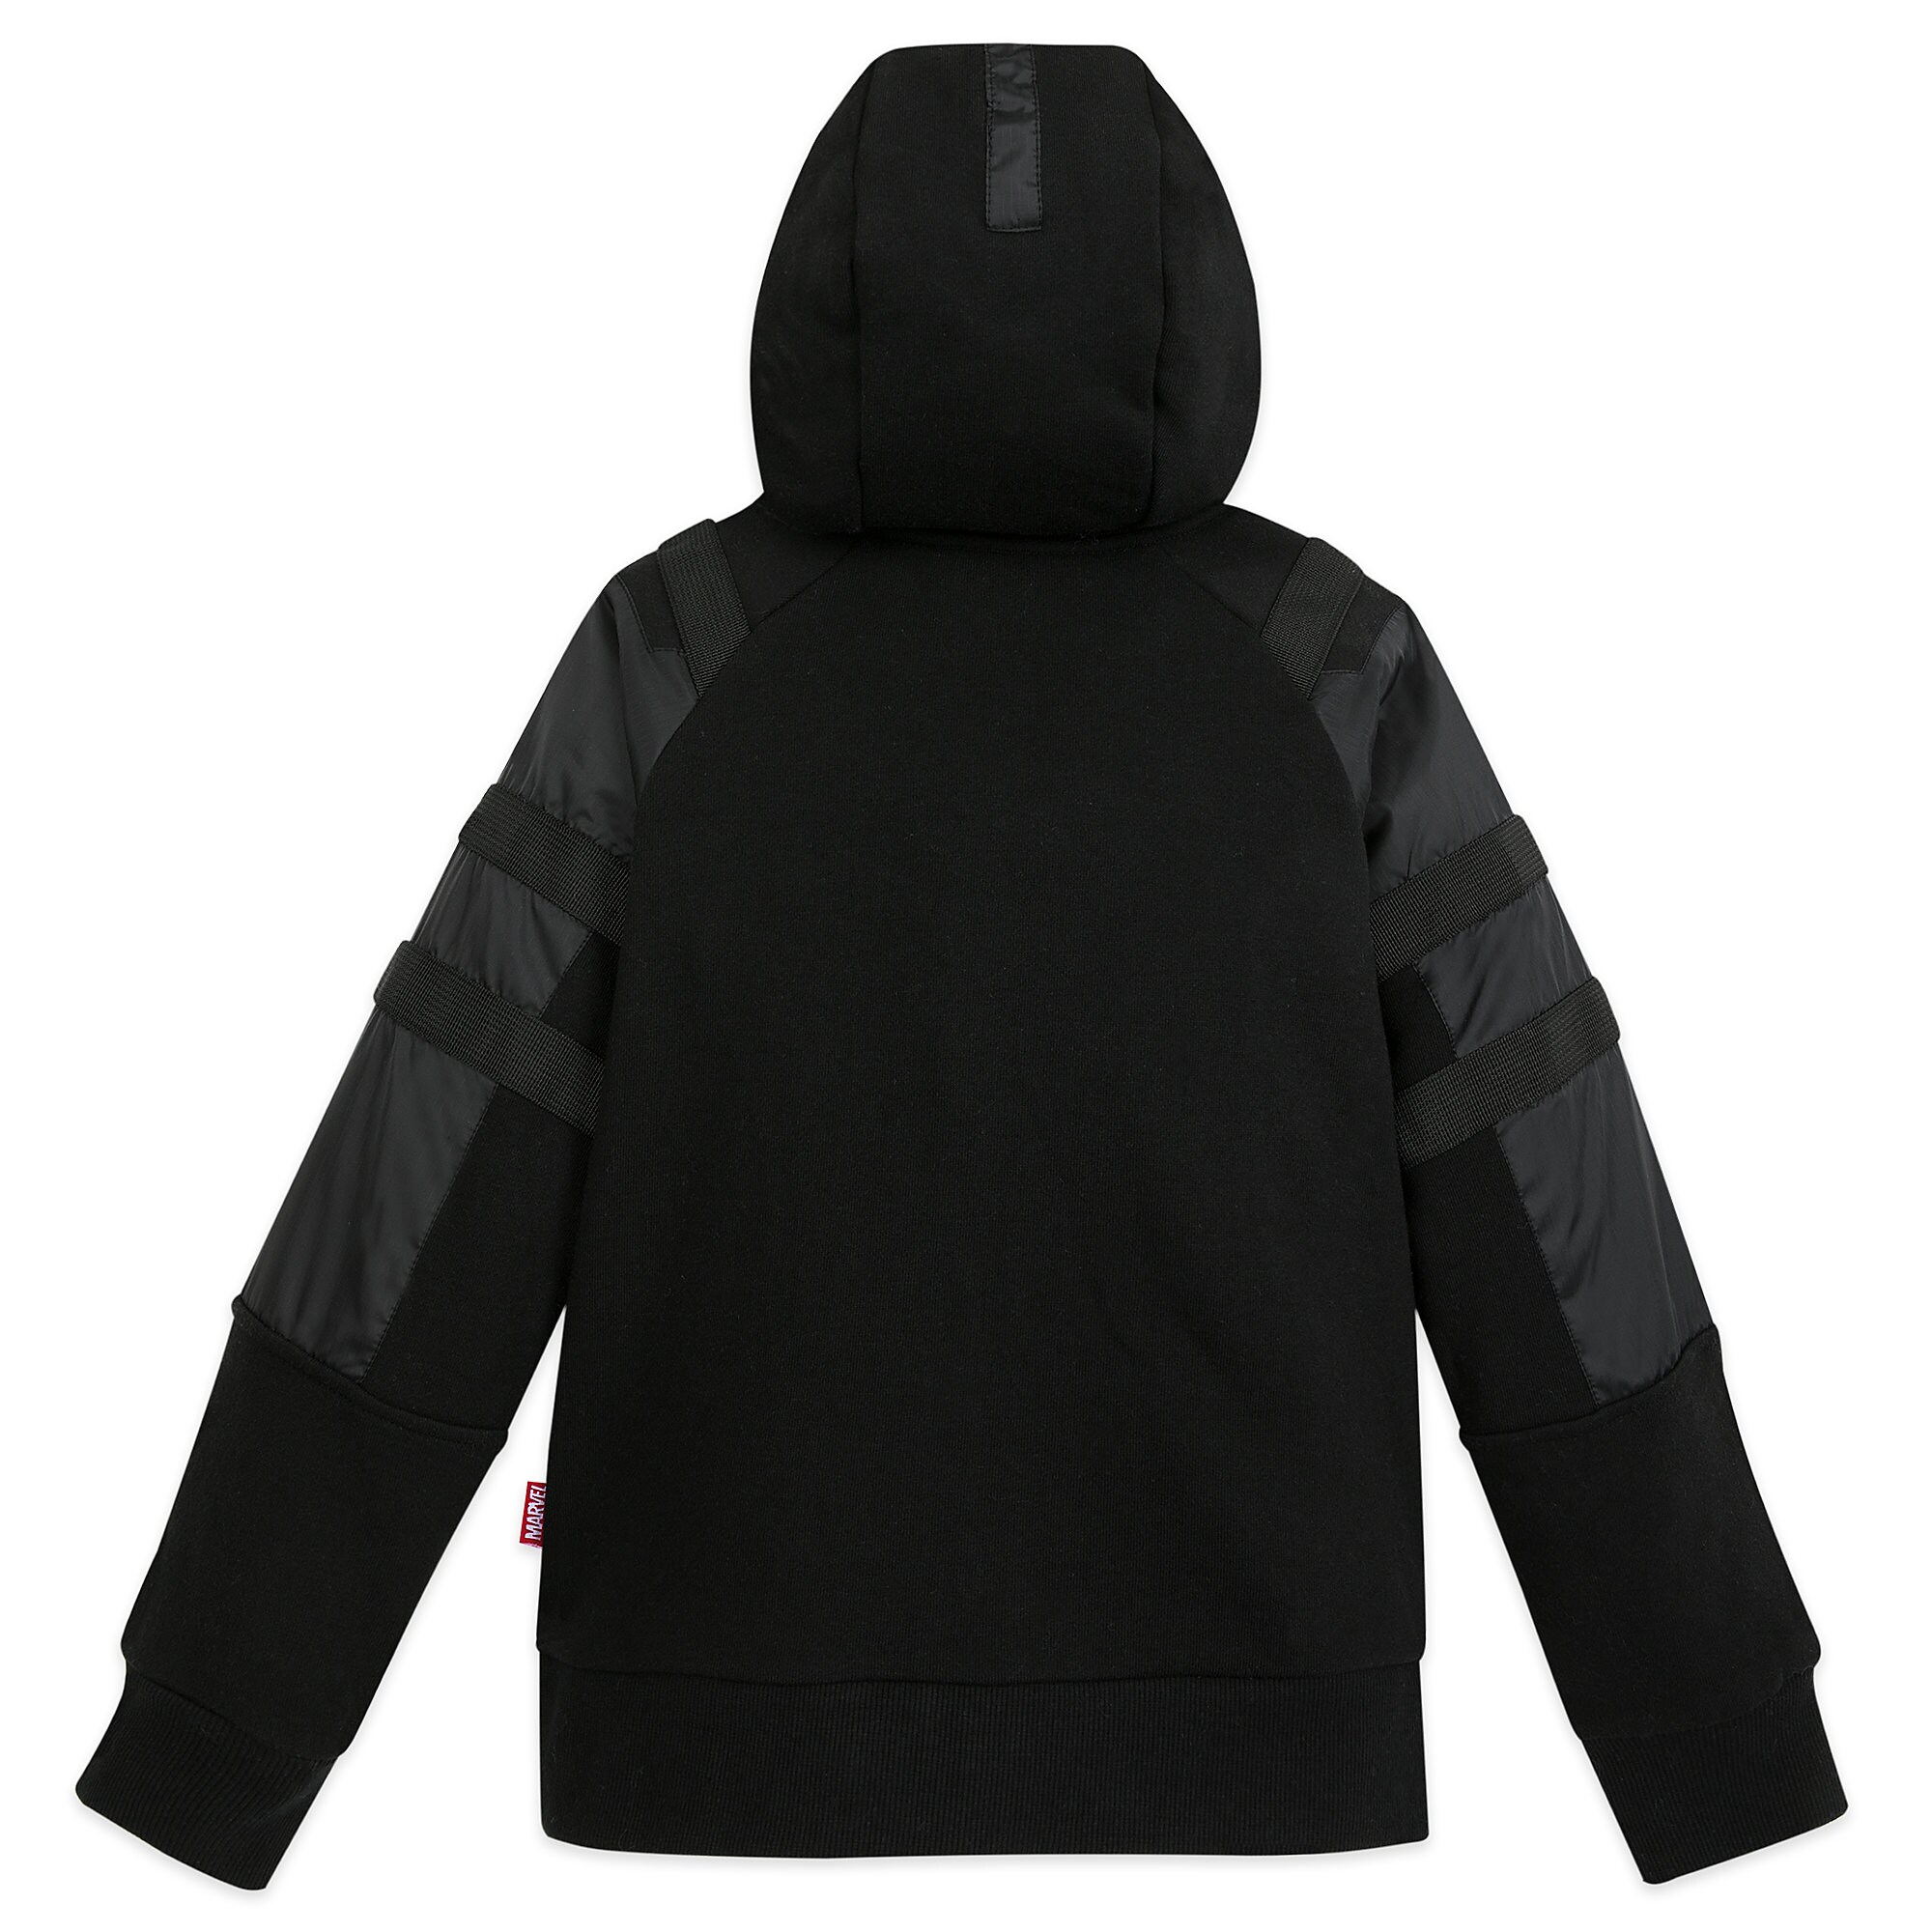 Miles Morales Hooded Jacket - Spider-Man: Far from Home